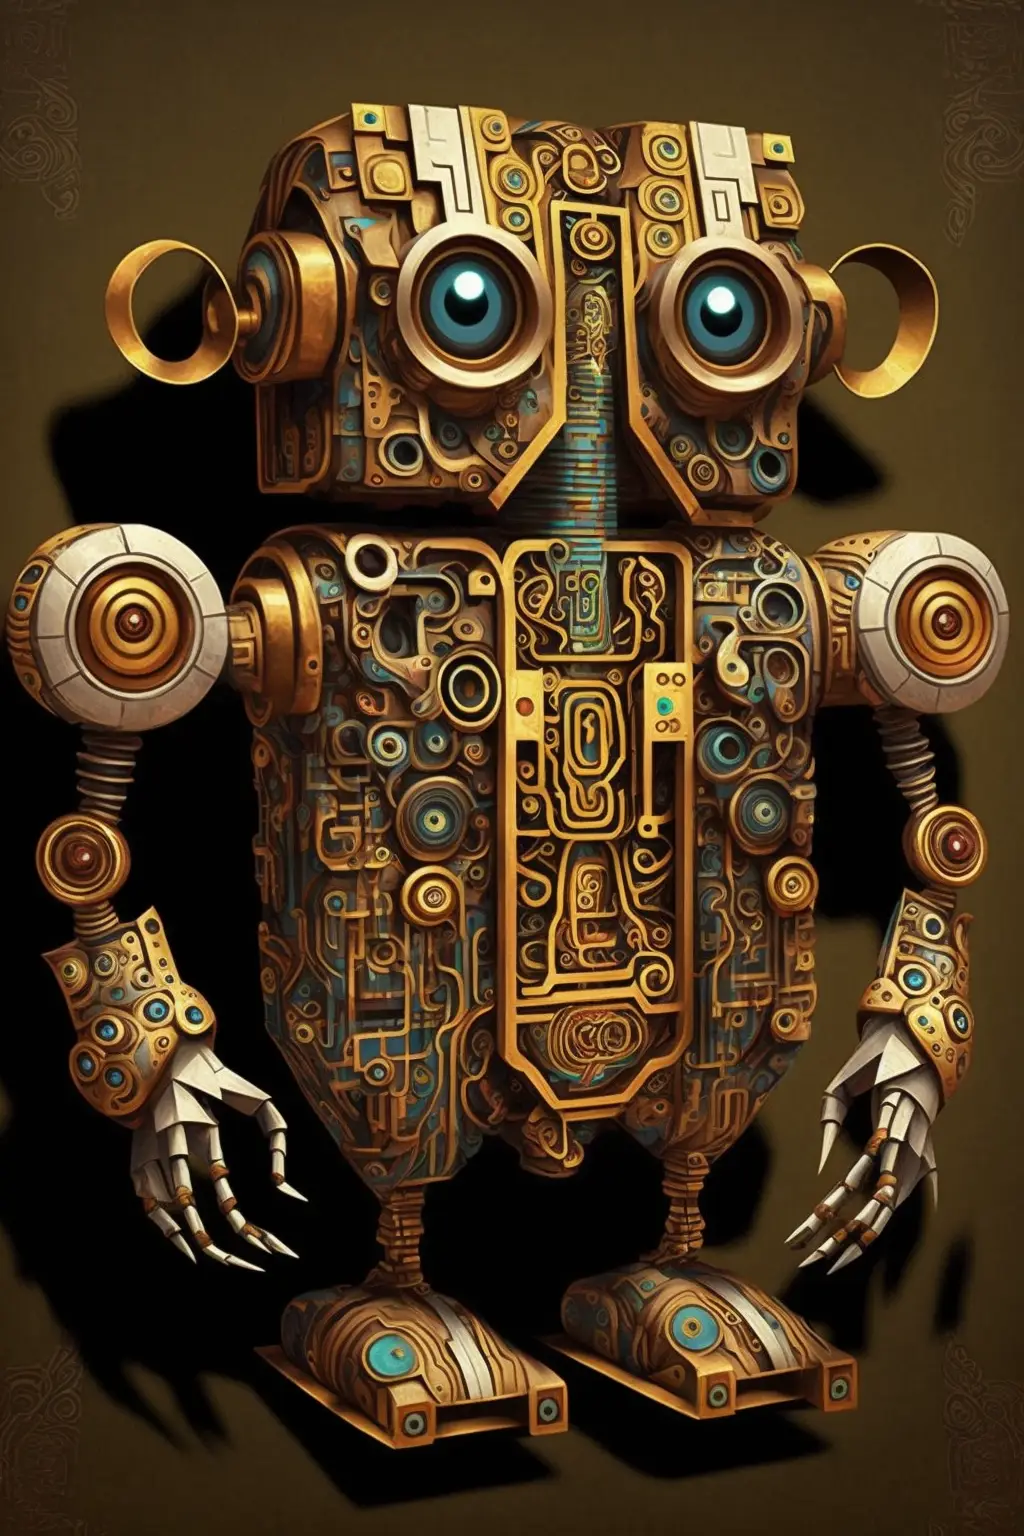 A Robot In The Style Of Gustav Klimt, Many Details, --Ar 3:2